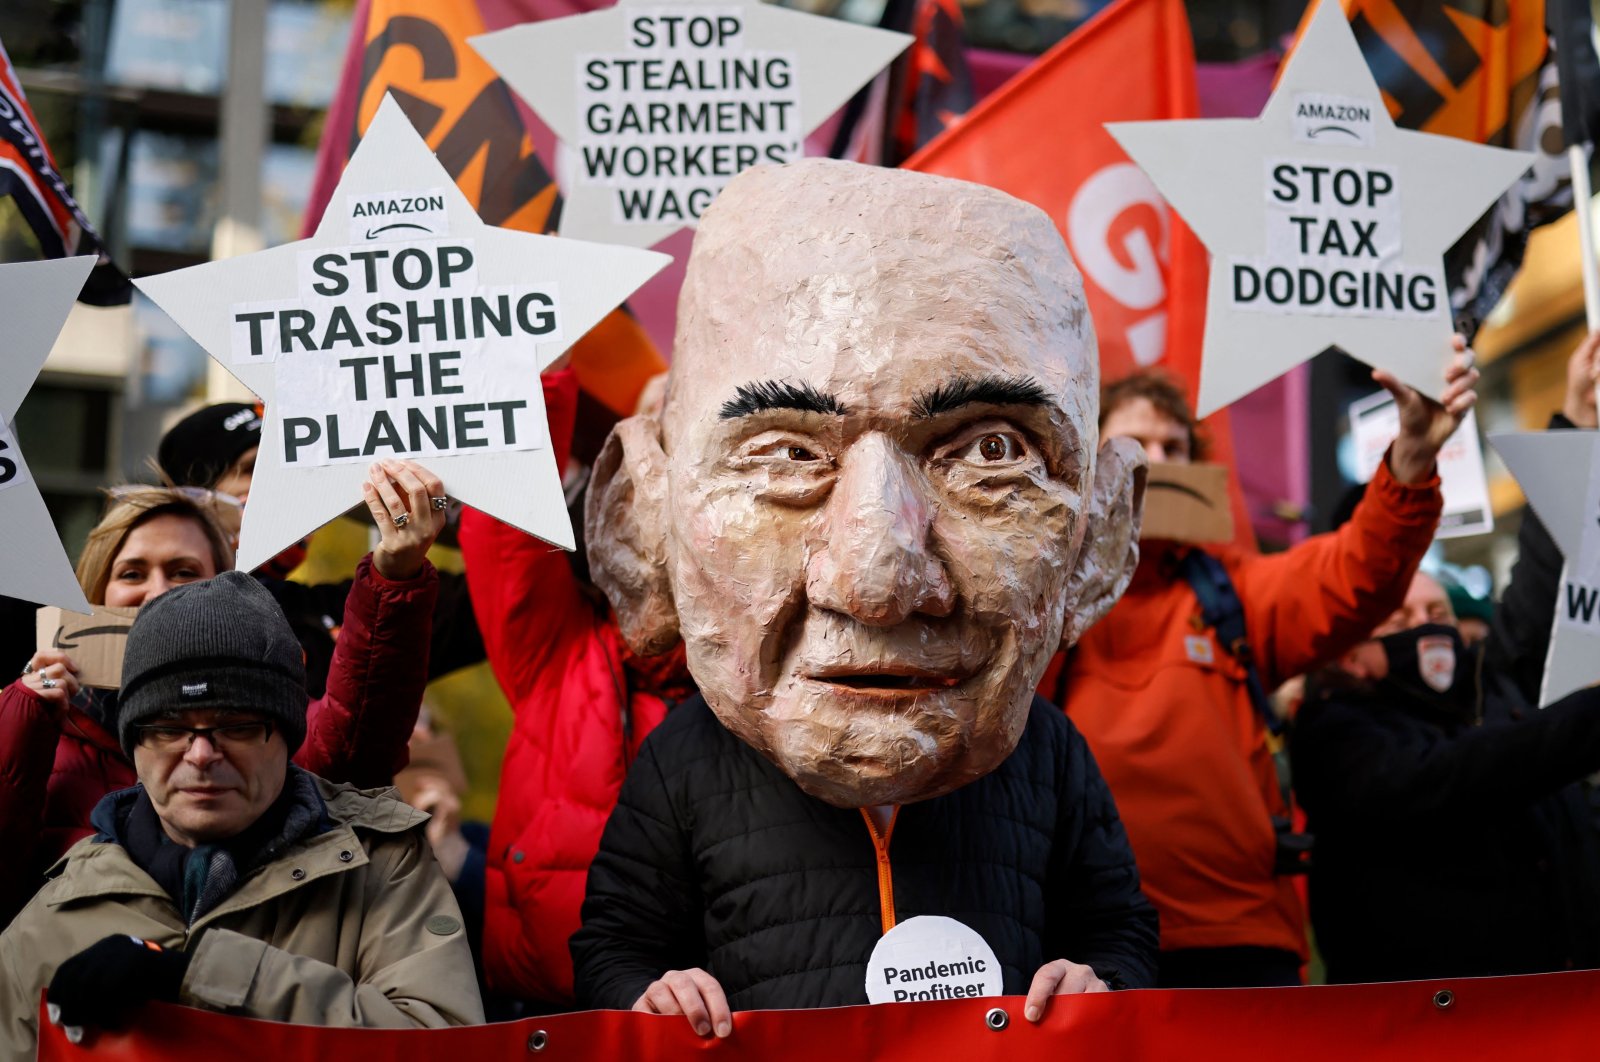 An activist from the Extinction Rebellion (XR) climate change group, wearing a mask depicting Jeff Bezos, takes part in a protest outside of Amazon&#039;s headquarters in central London, U.K., on Nov. 26, 2021. (AFP Photo)